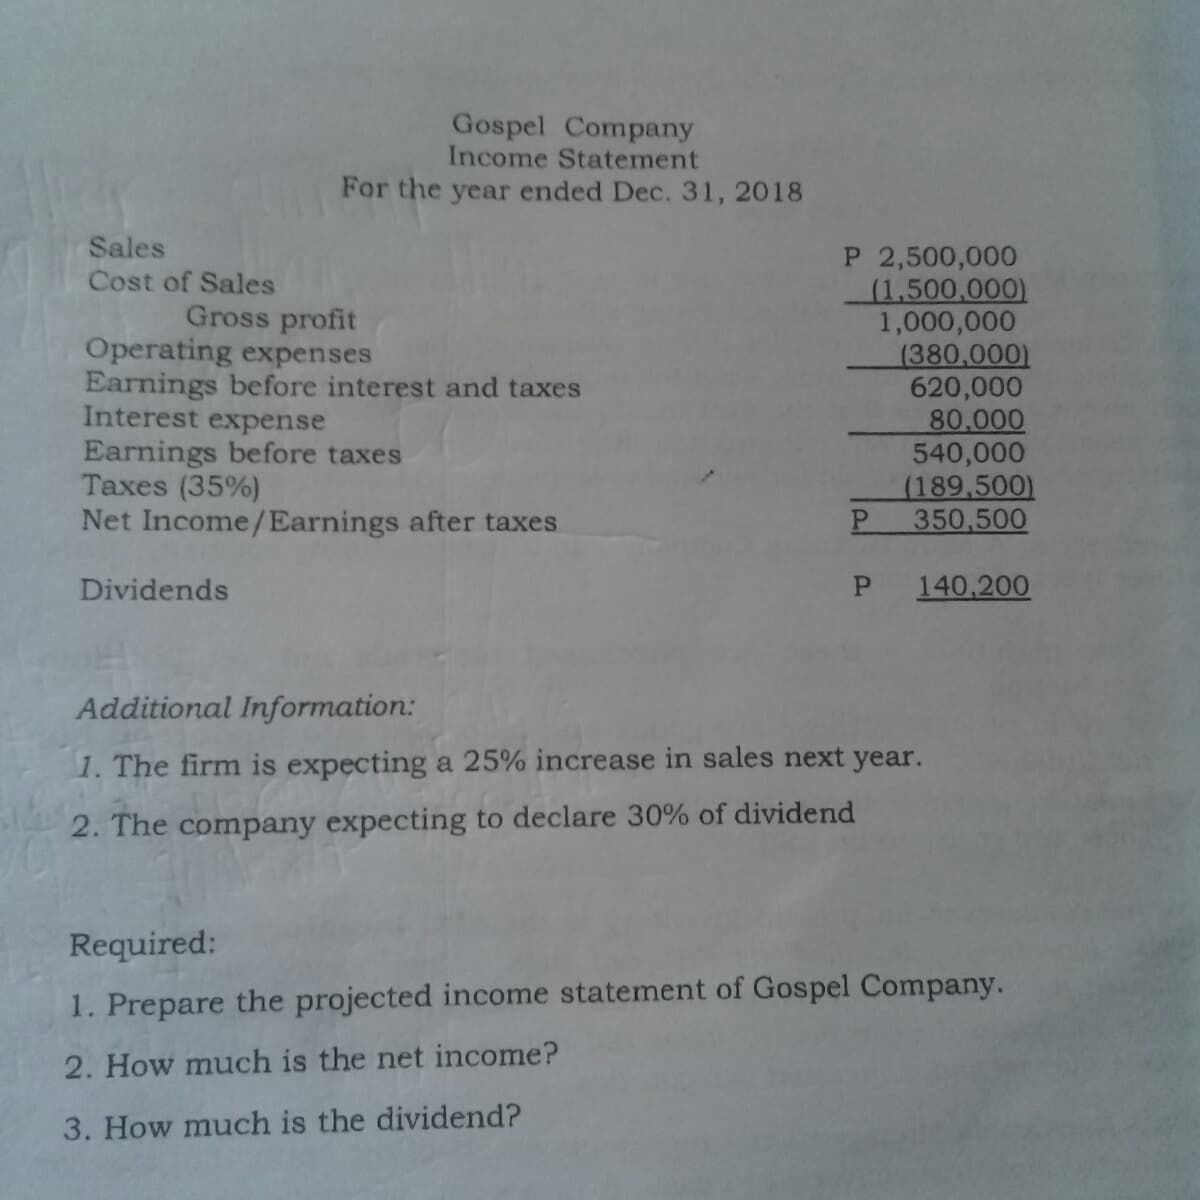 Gospel Company
Income Statement
For the year ended Dec. 31, 2018
Sales
P 2,500,000
1,500,000)
1,000,000
(380,000)
620,000
80,000
540,000
(189,500)
350,500
Cost of Sales
Gross profit
Operating expenses
Earnings before interest and taxes
Interest expense
Earnings before taxes
Taxes (35%)
Net Income/Earnings after taxes
P
Dividends
P 140,200
Additional Information:
1. The firm is expecting a 25% increase in sales next year.
2. The company expecting to declare 30% of dividend
Required:
1. Prepare the projected income statement of Gospel Company.
2. How much is the net income?
3. How much is the dividend?
